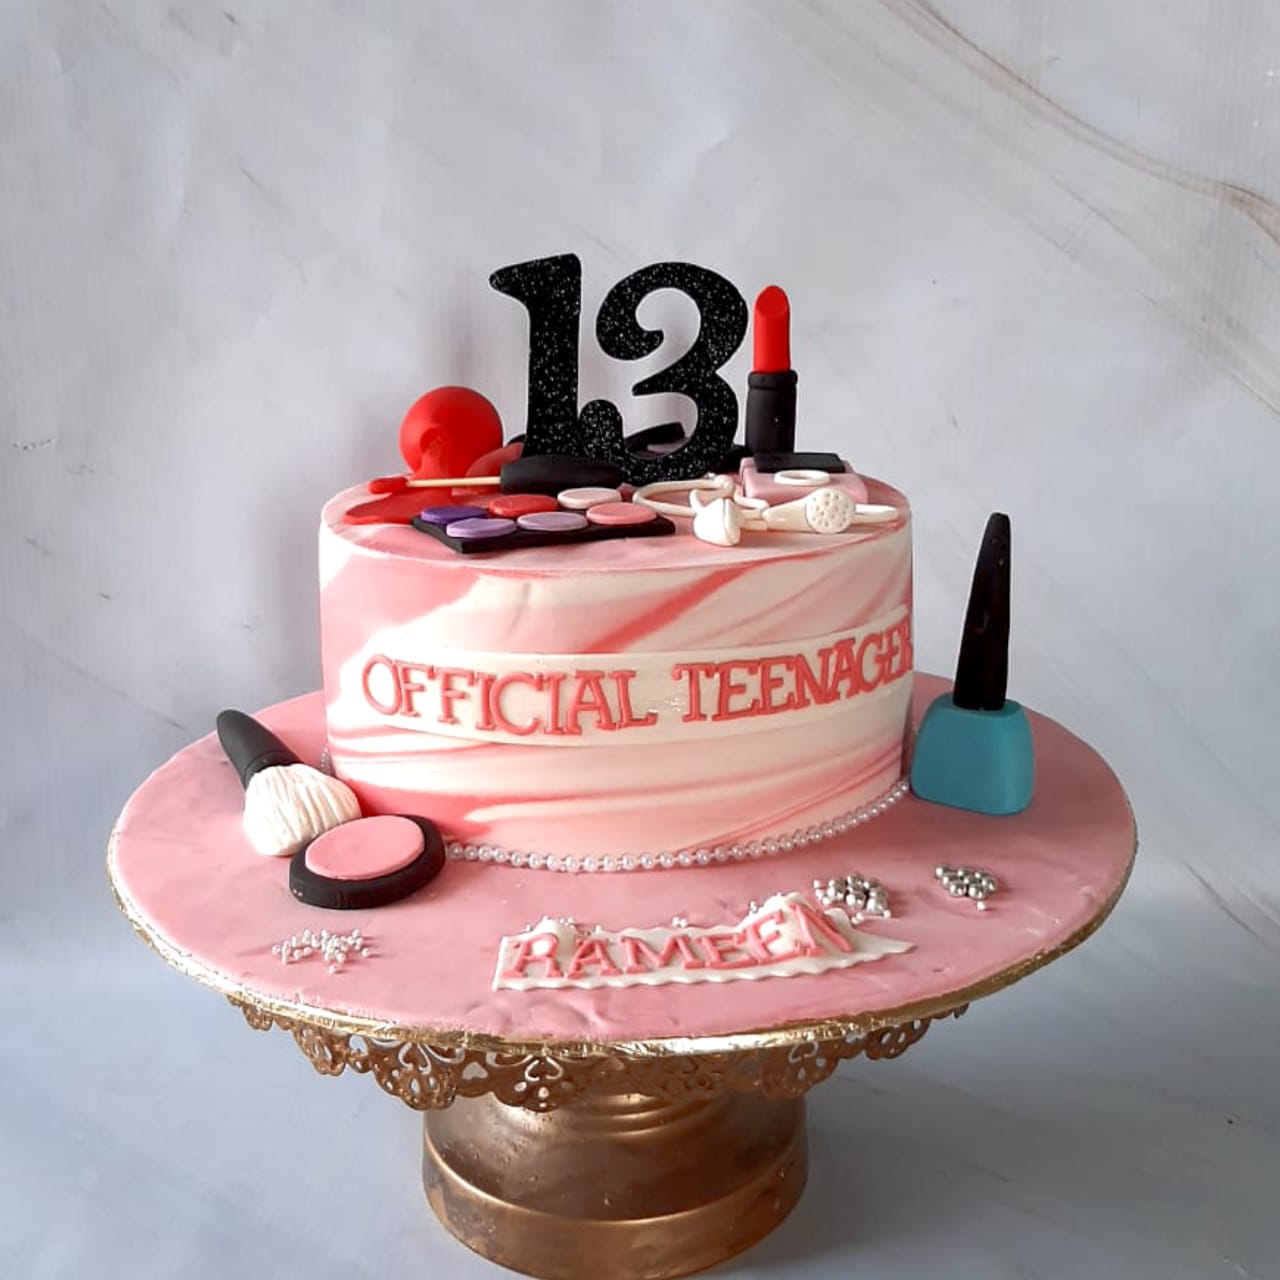 Officially Teenage Cake » Once Upon A Cake